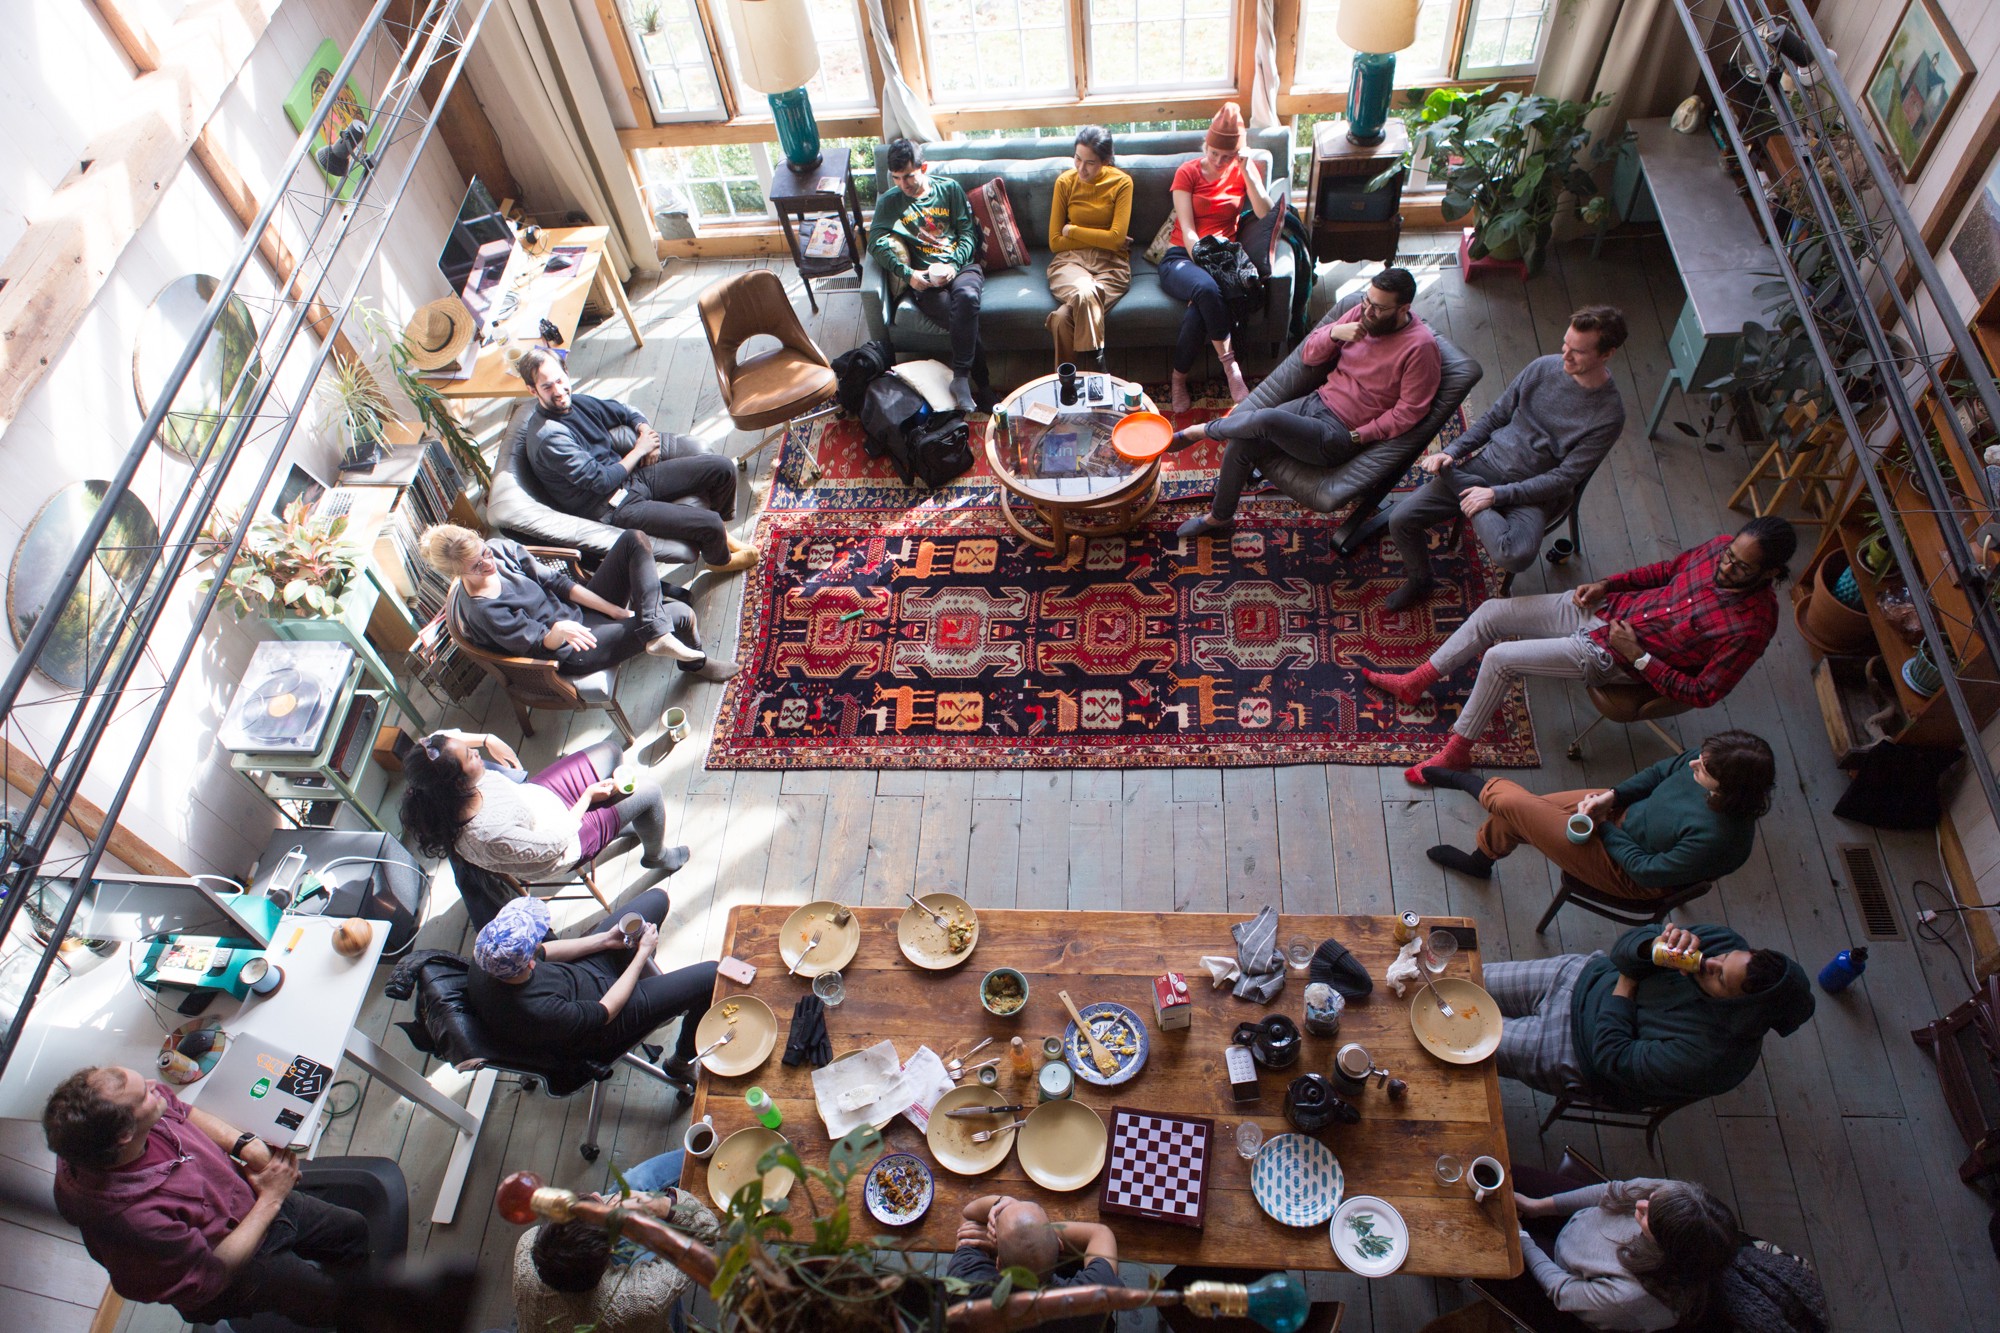 Overhead view of sfpc teachers in a circle during a retreat, discussing and eating